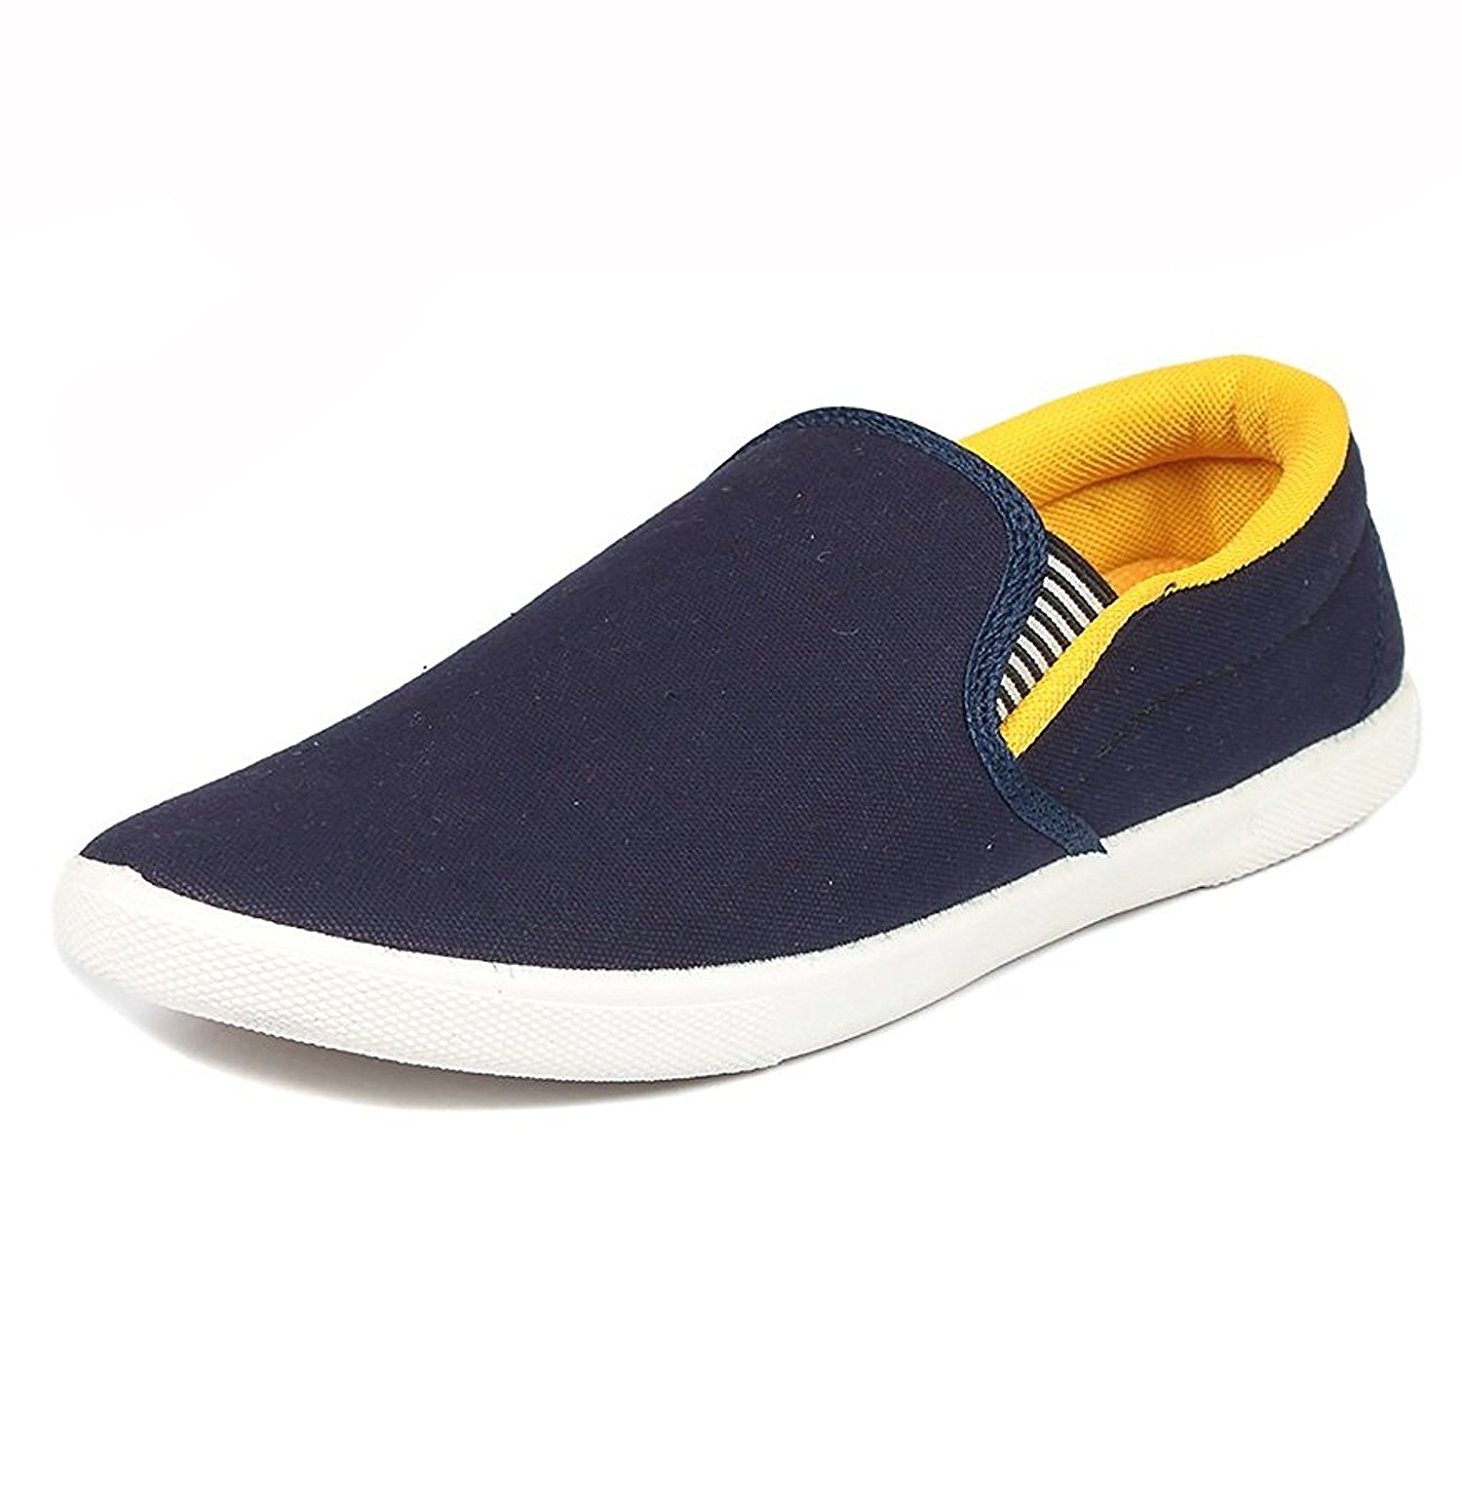 Casual Loafer's Shoes at Rs 199